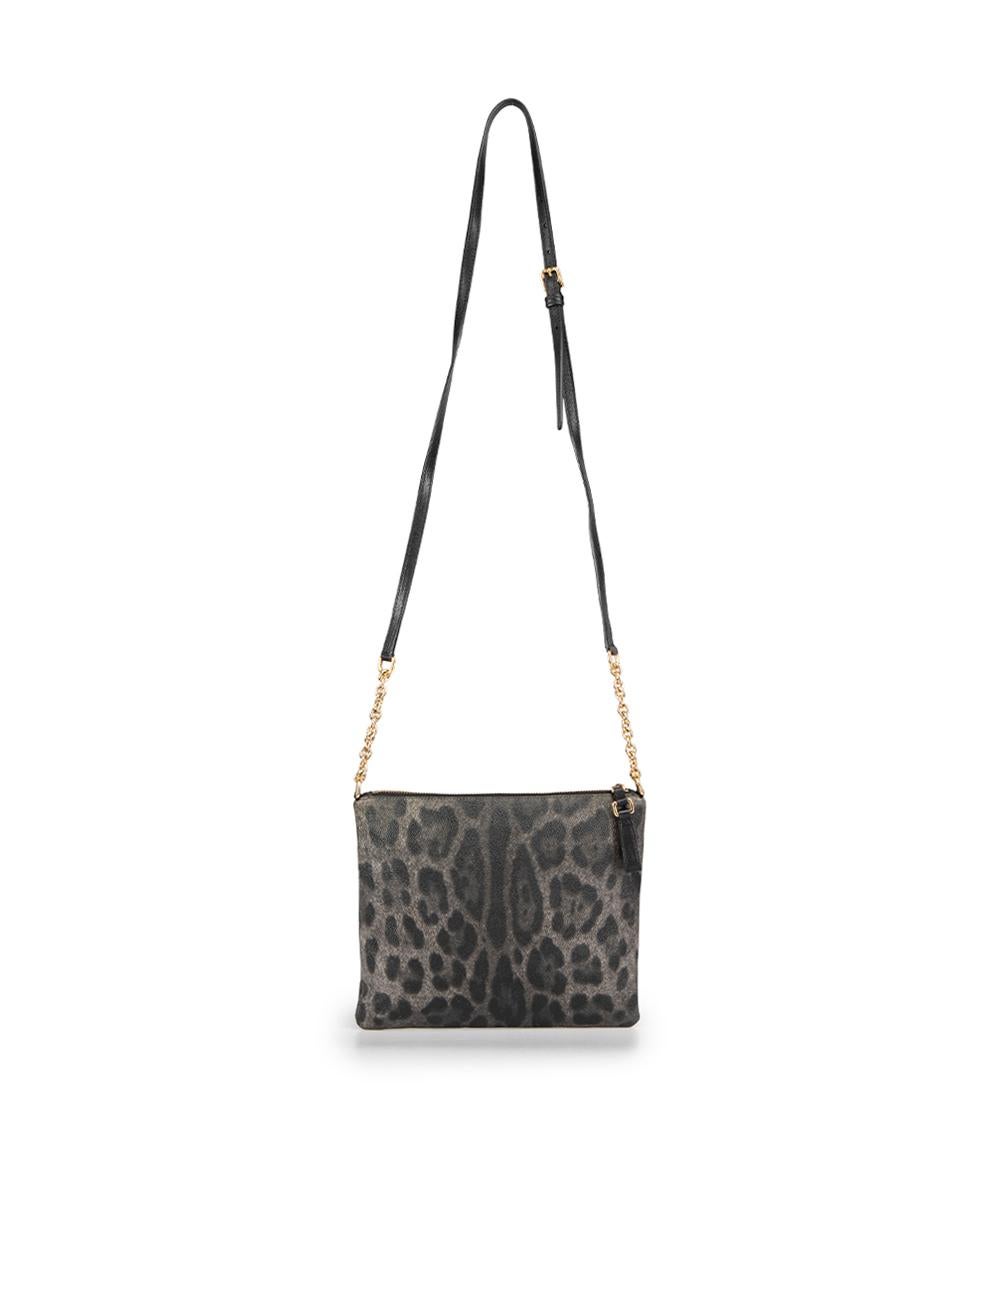 Dolce & Gabbana Grey Leopard Print Crossbody Bag In Excellent Condition For Sale In London, GB